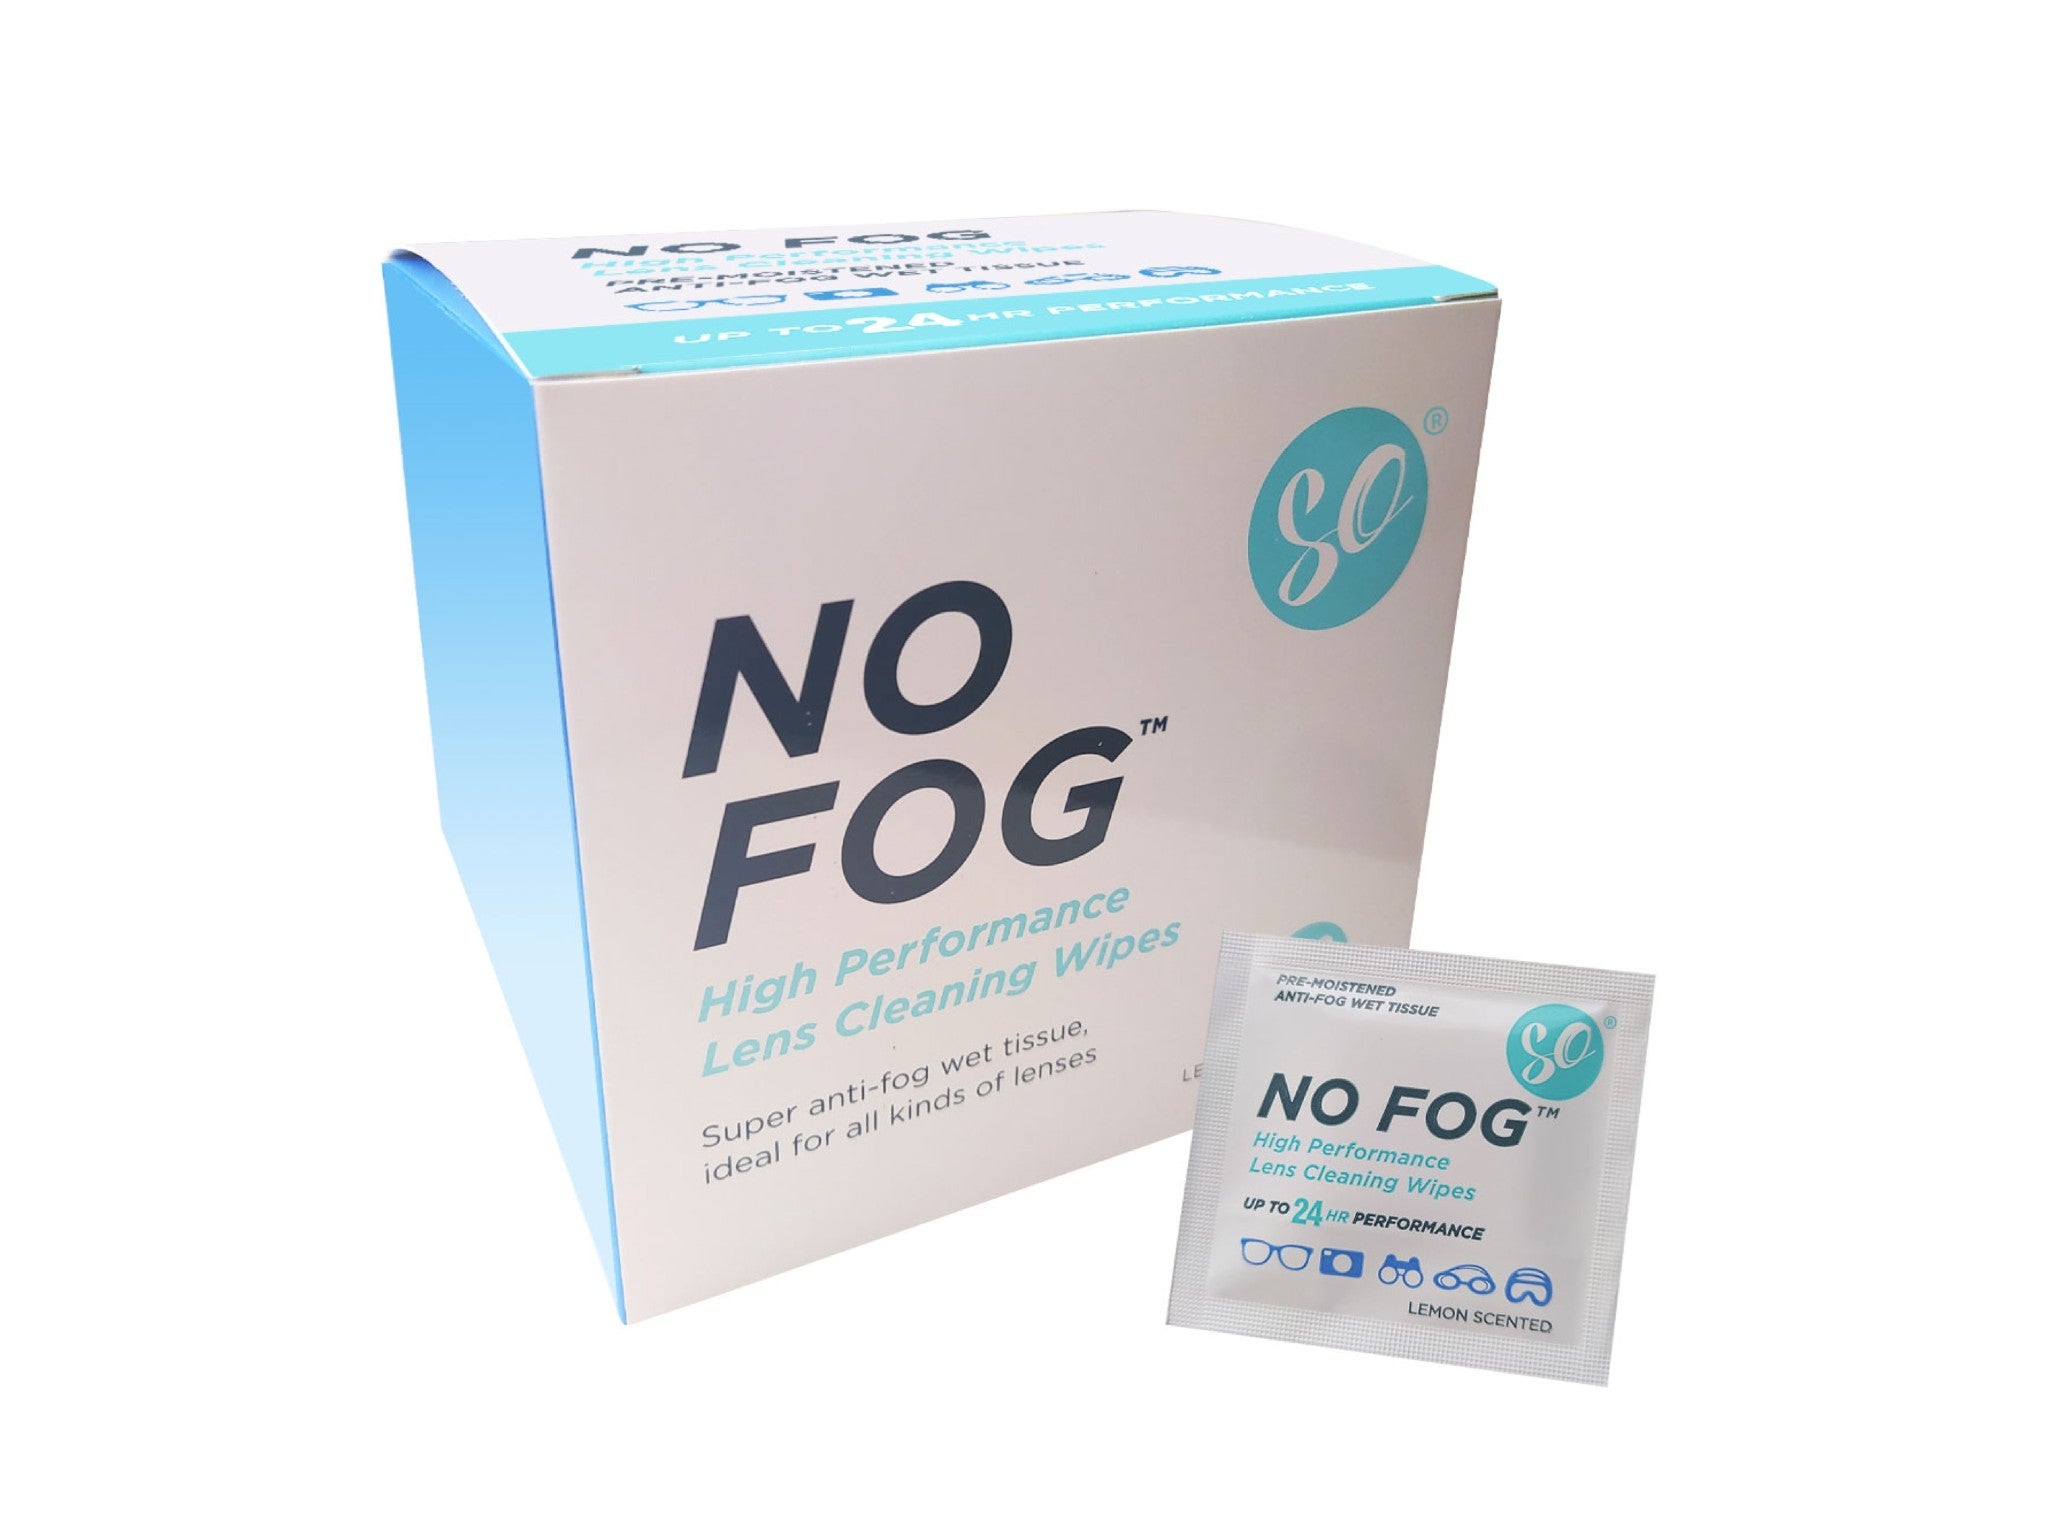 No Fog high performance lens cleaning wipes indybest.jpg